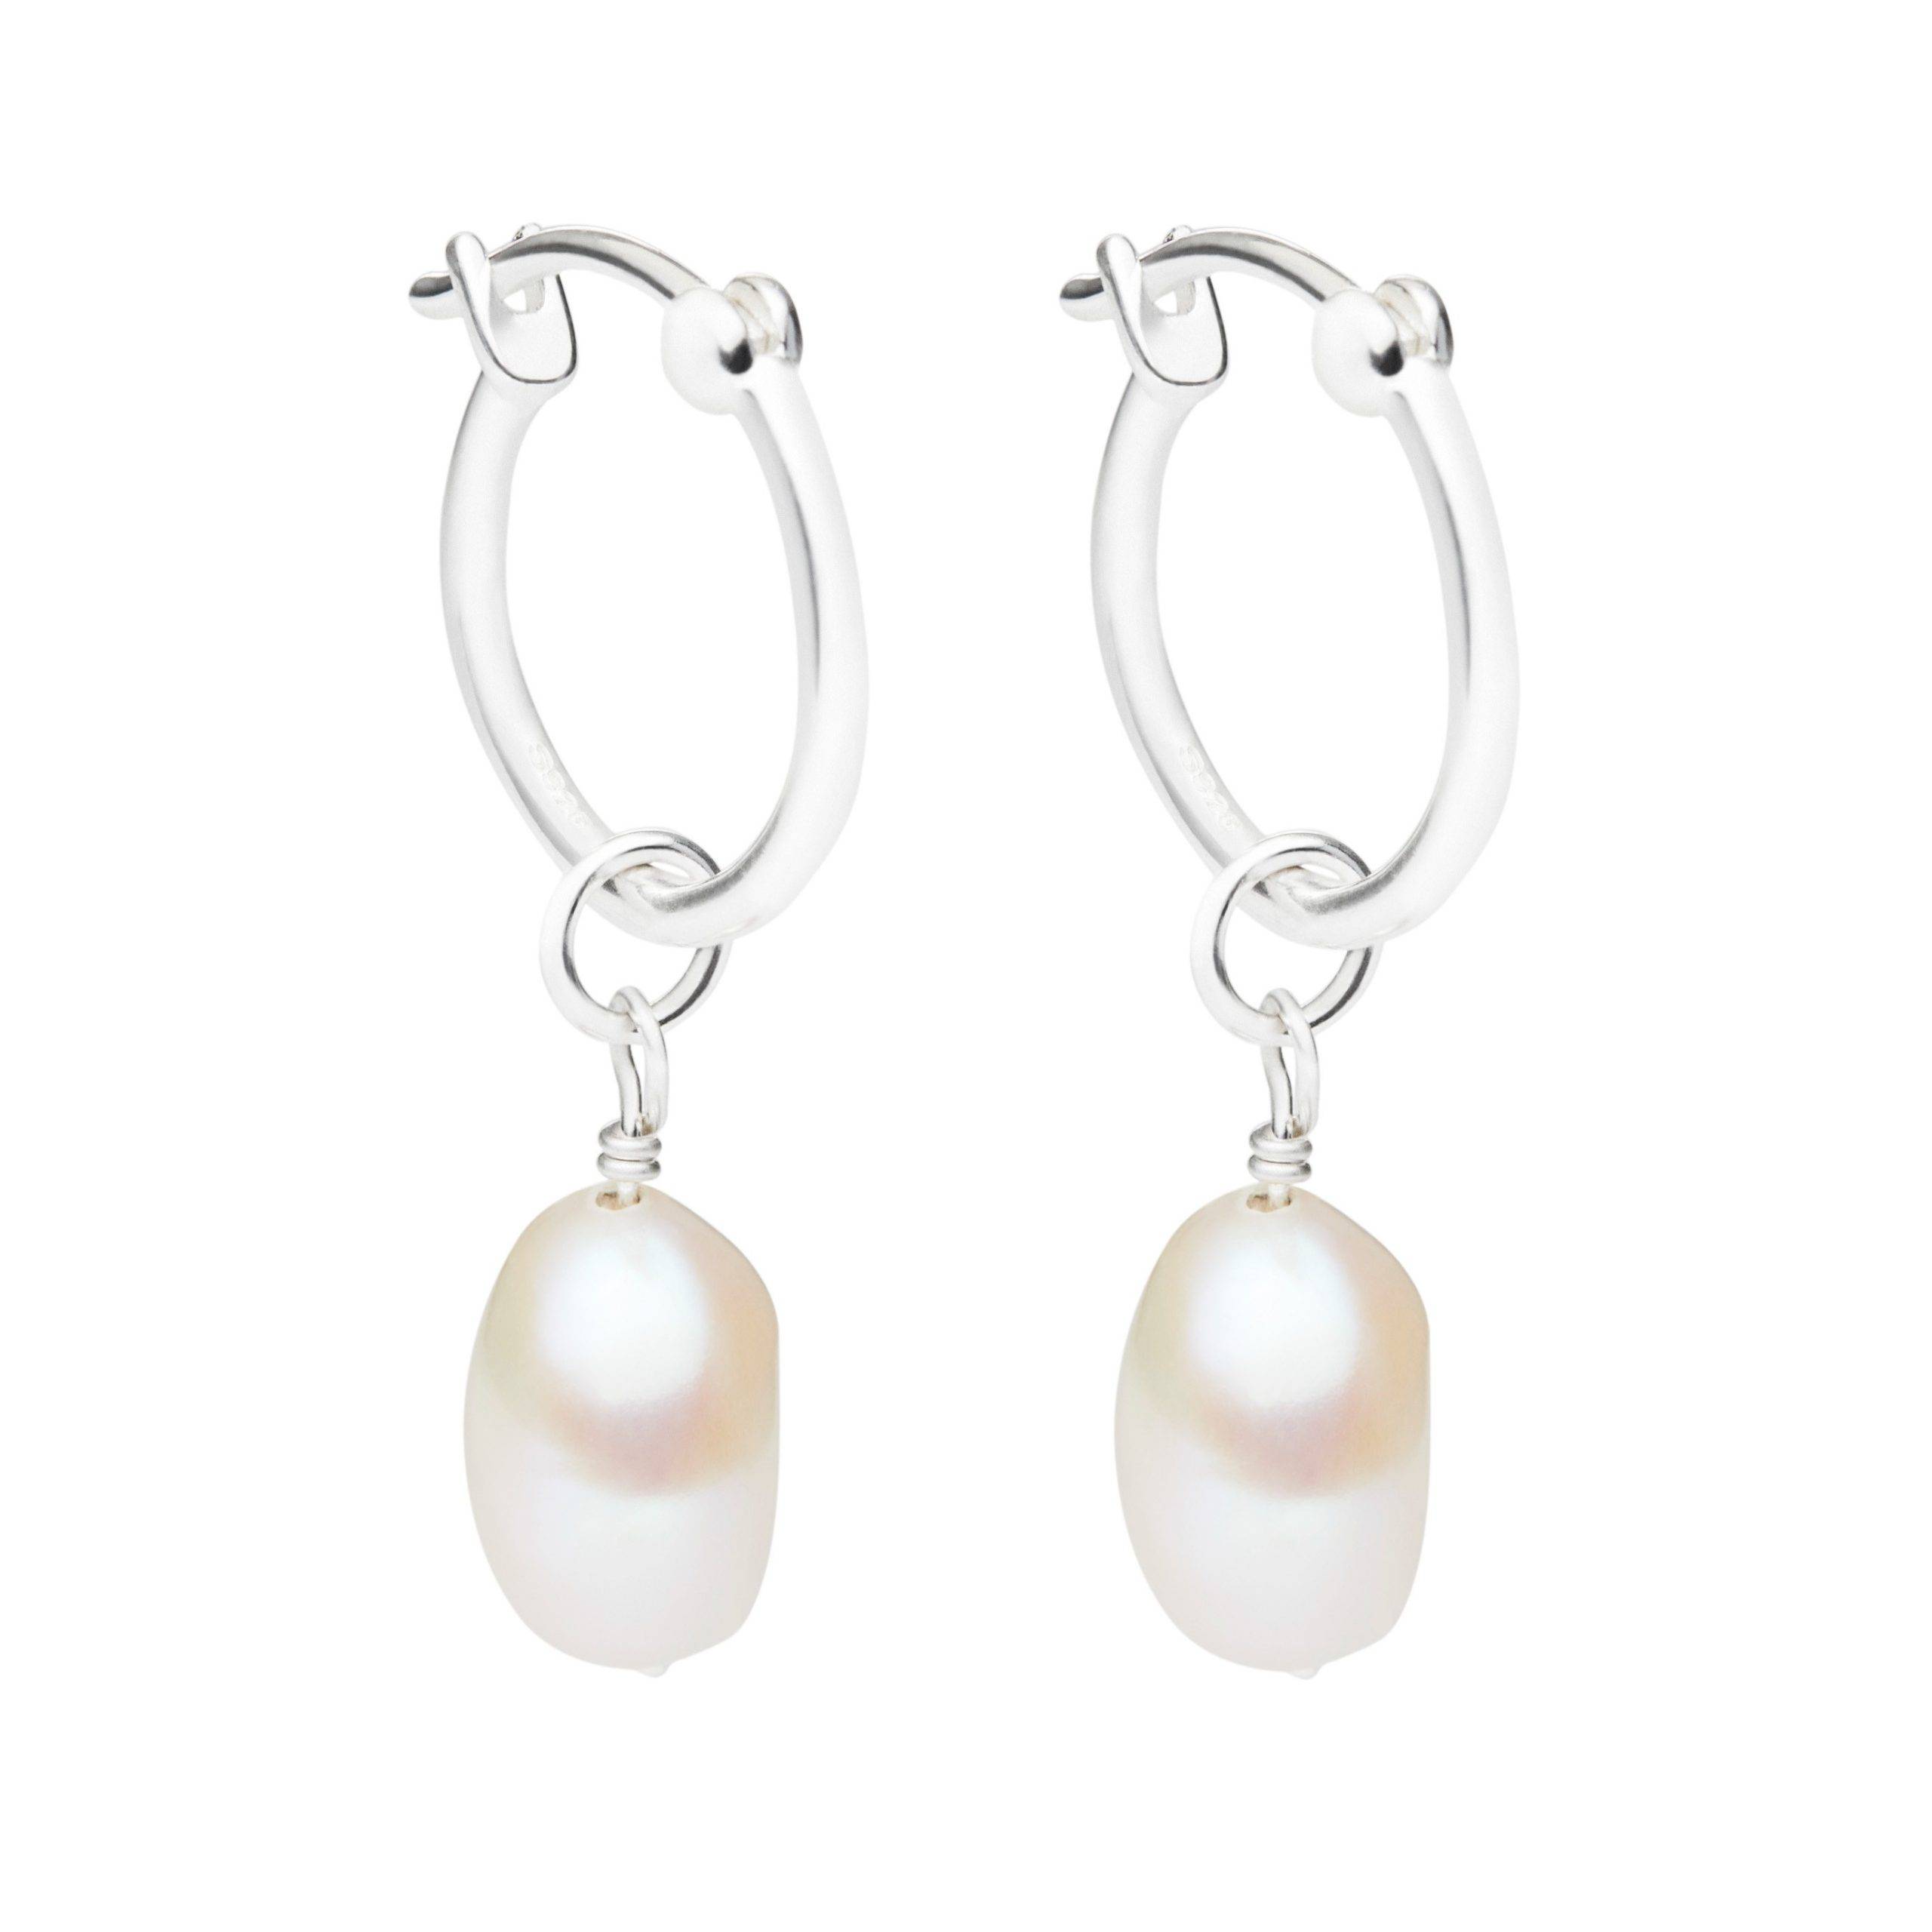 PEARL AND AMERICAN DIAMOND 925 STERLING SILVER STUDS